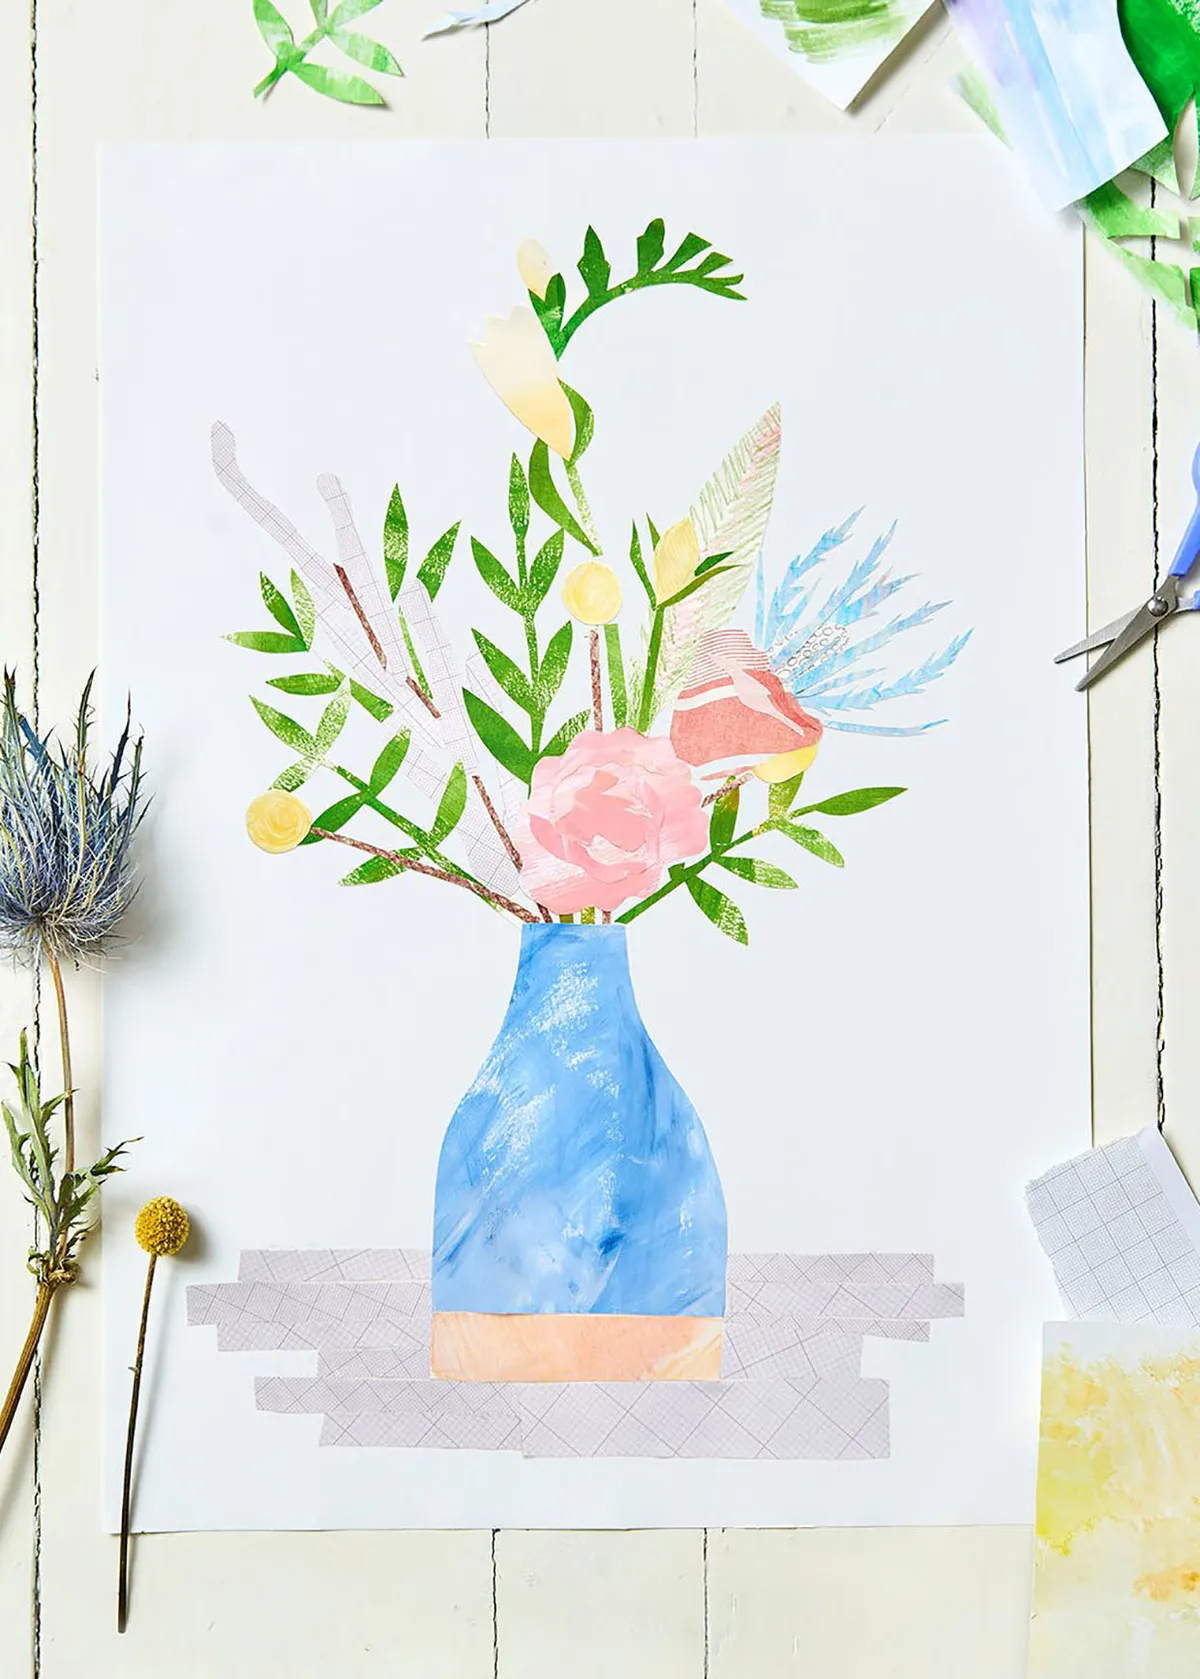 Flowers in a vase collage